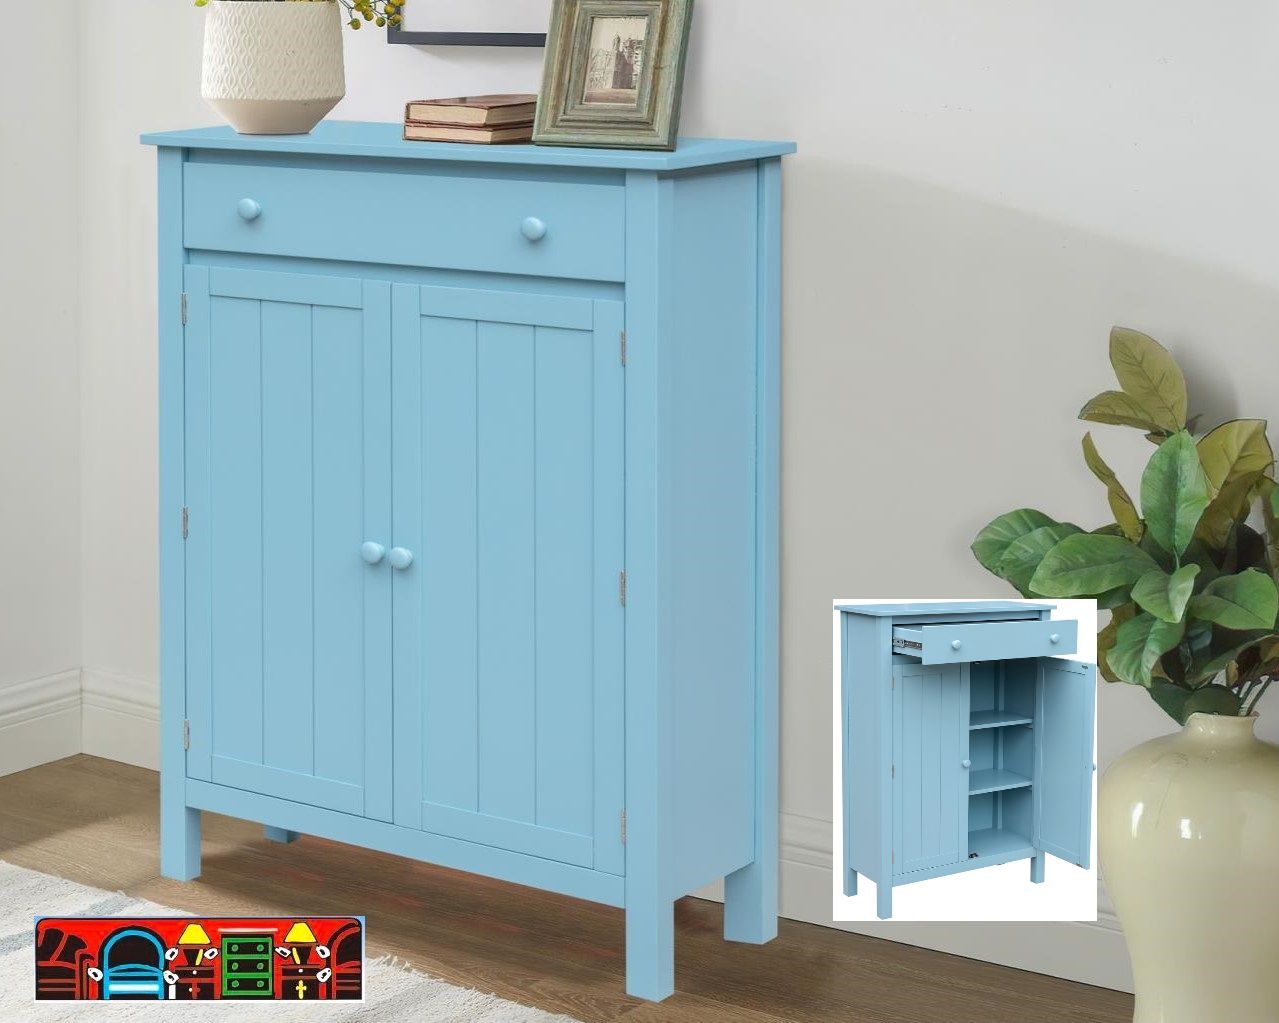 The Seascape Cabinet, crafted from wood and finished in blue, features one drawer, two doors, and two shelves. It is available at Bratz-CFW in Fort Myers, FL.